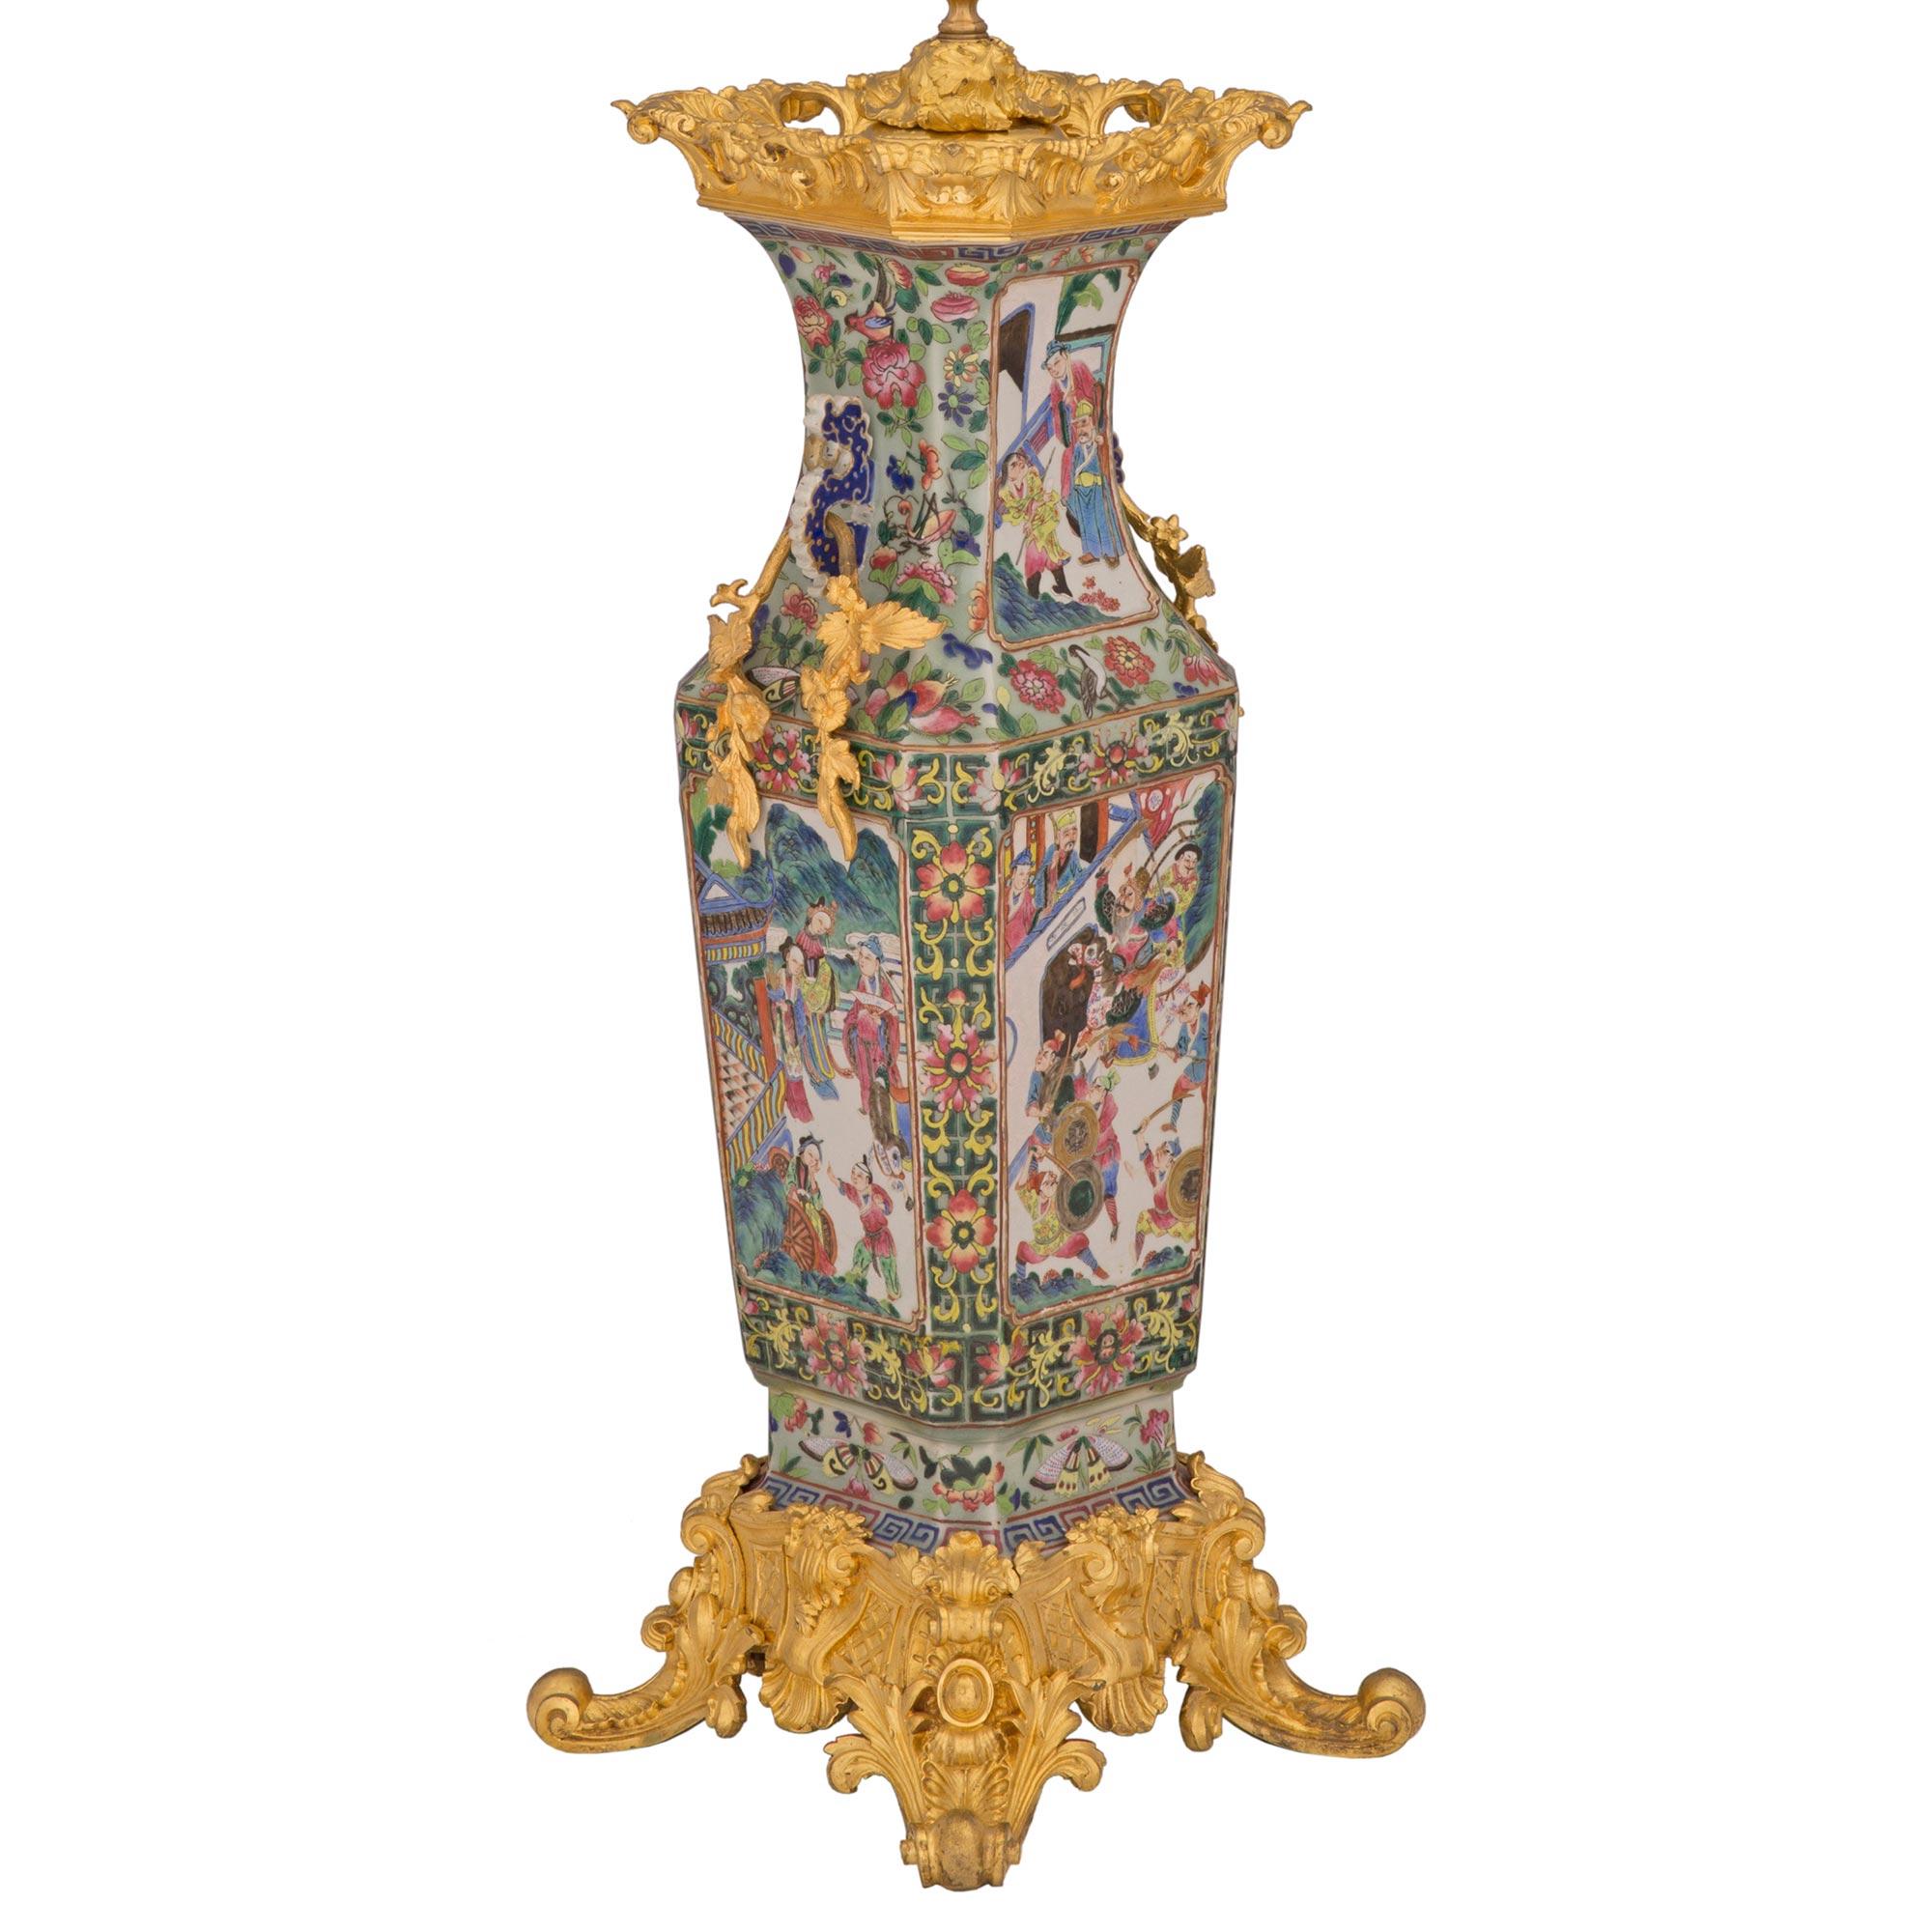 A superb French and Asian collaboration 19th century Louis XV st. Famille Verte porcelain and ormolu lamp. The lamp is raised by a beautiful and richly chased scrolled foliate base with striking cabochons, acanthus leaves and lattice designs. The